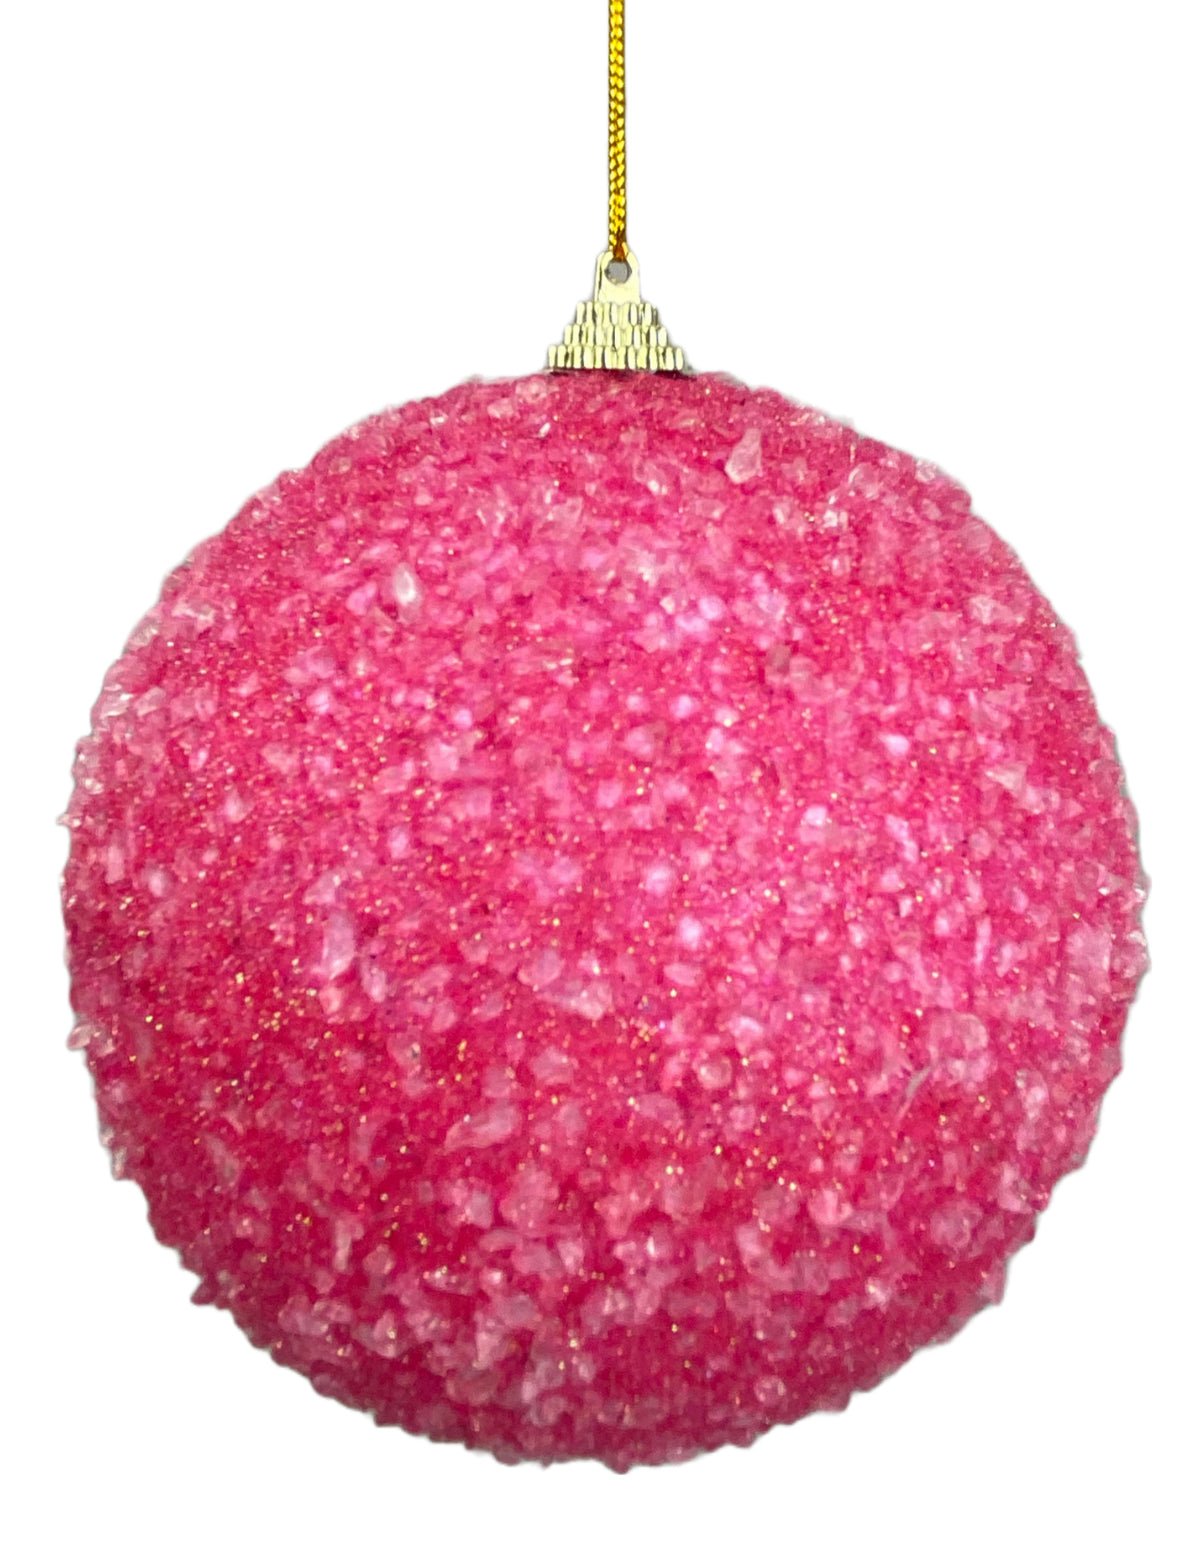 Candy sugared pink ball ornament 5” - Greenery Market85677BT